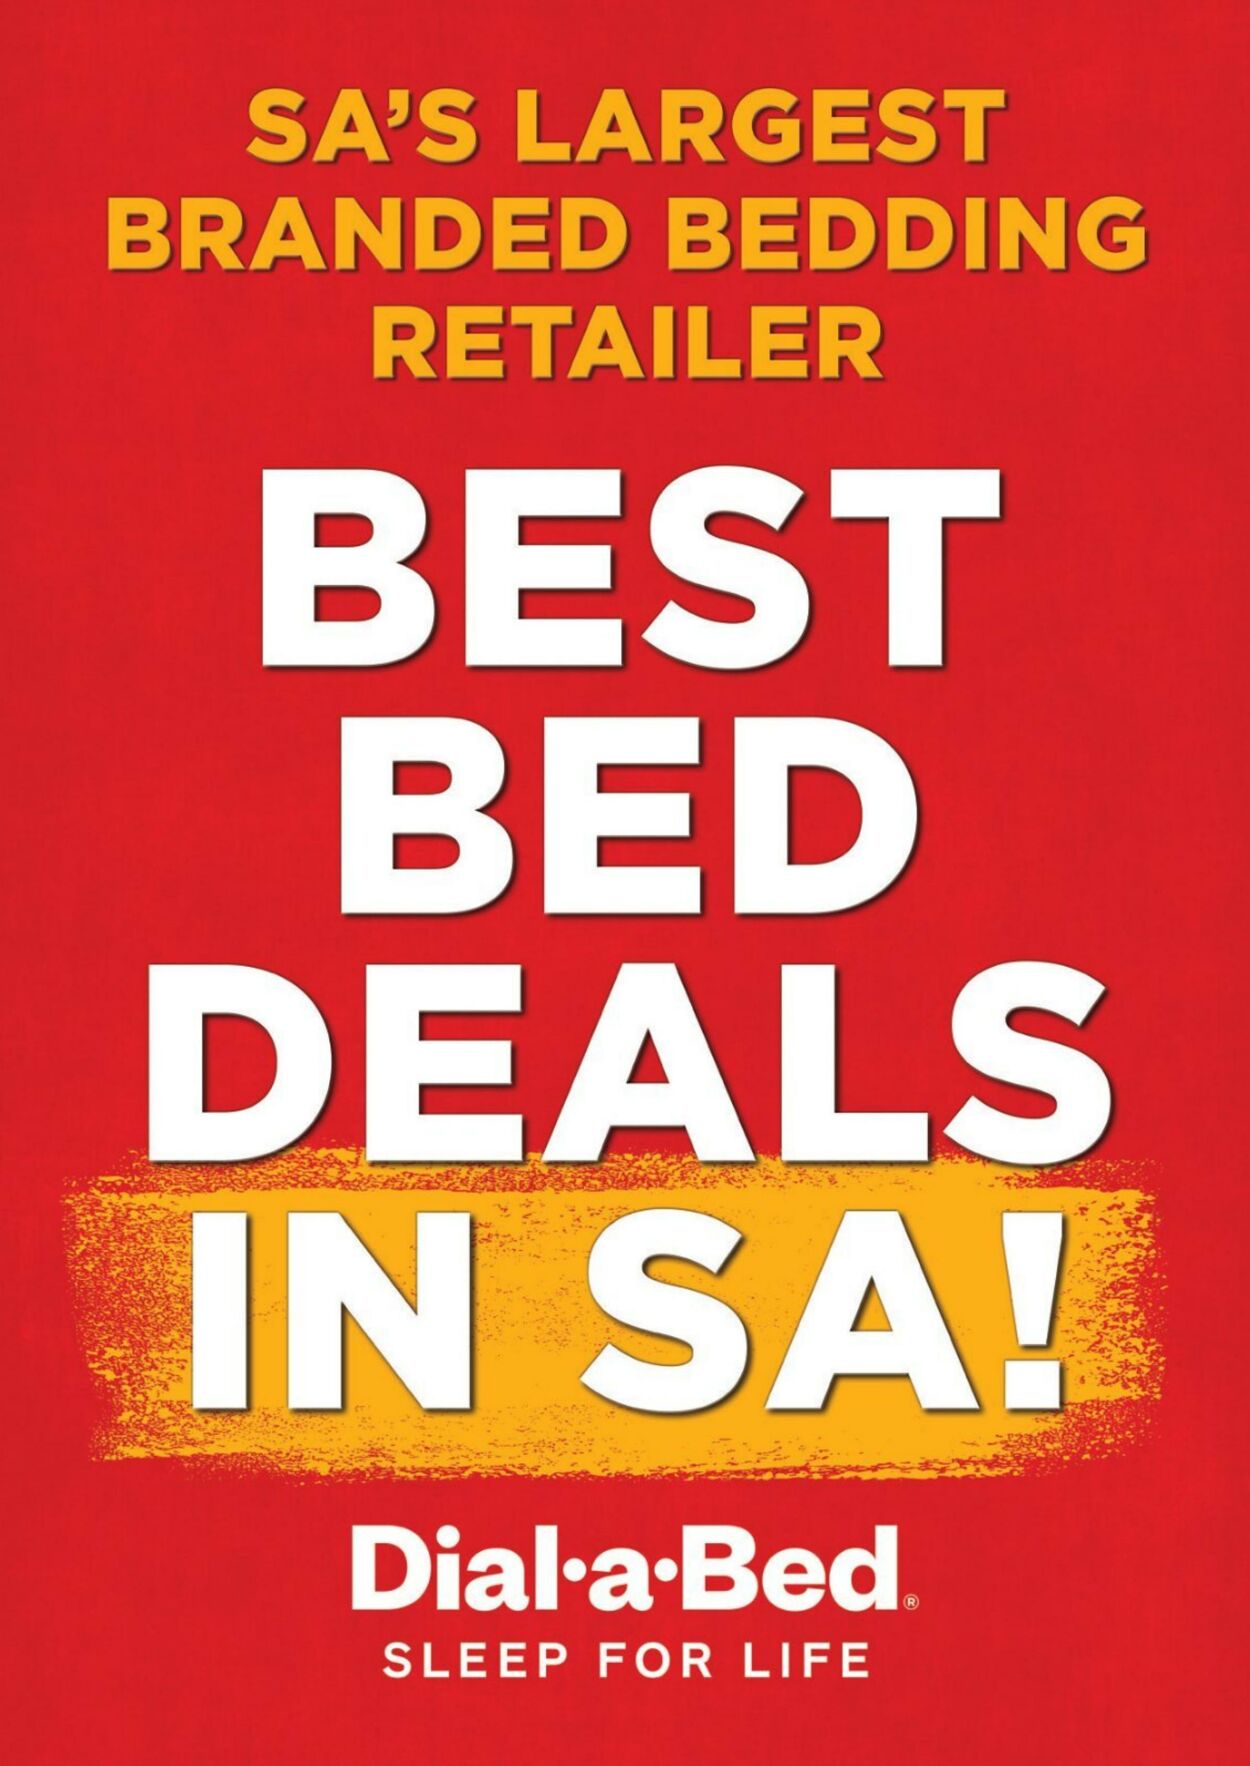 Dial a Bed Promotional specials